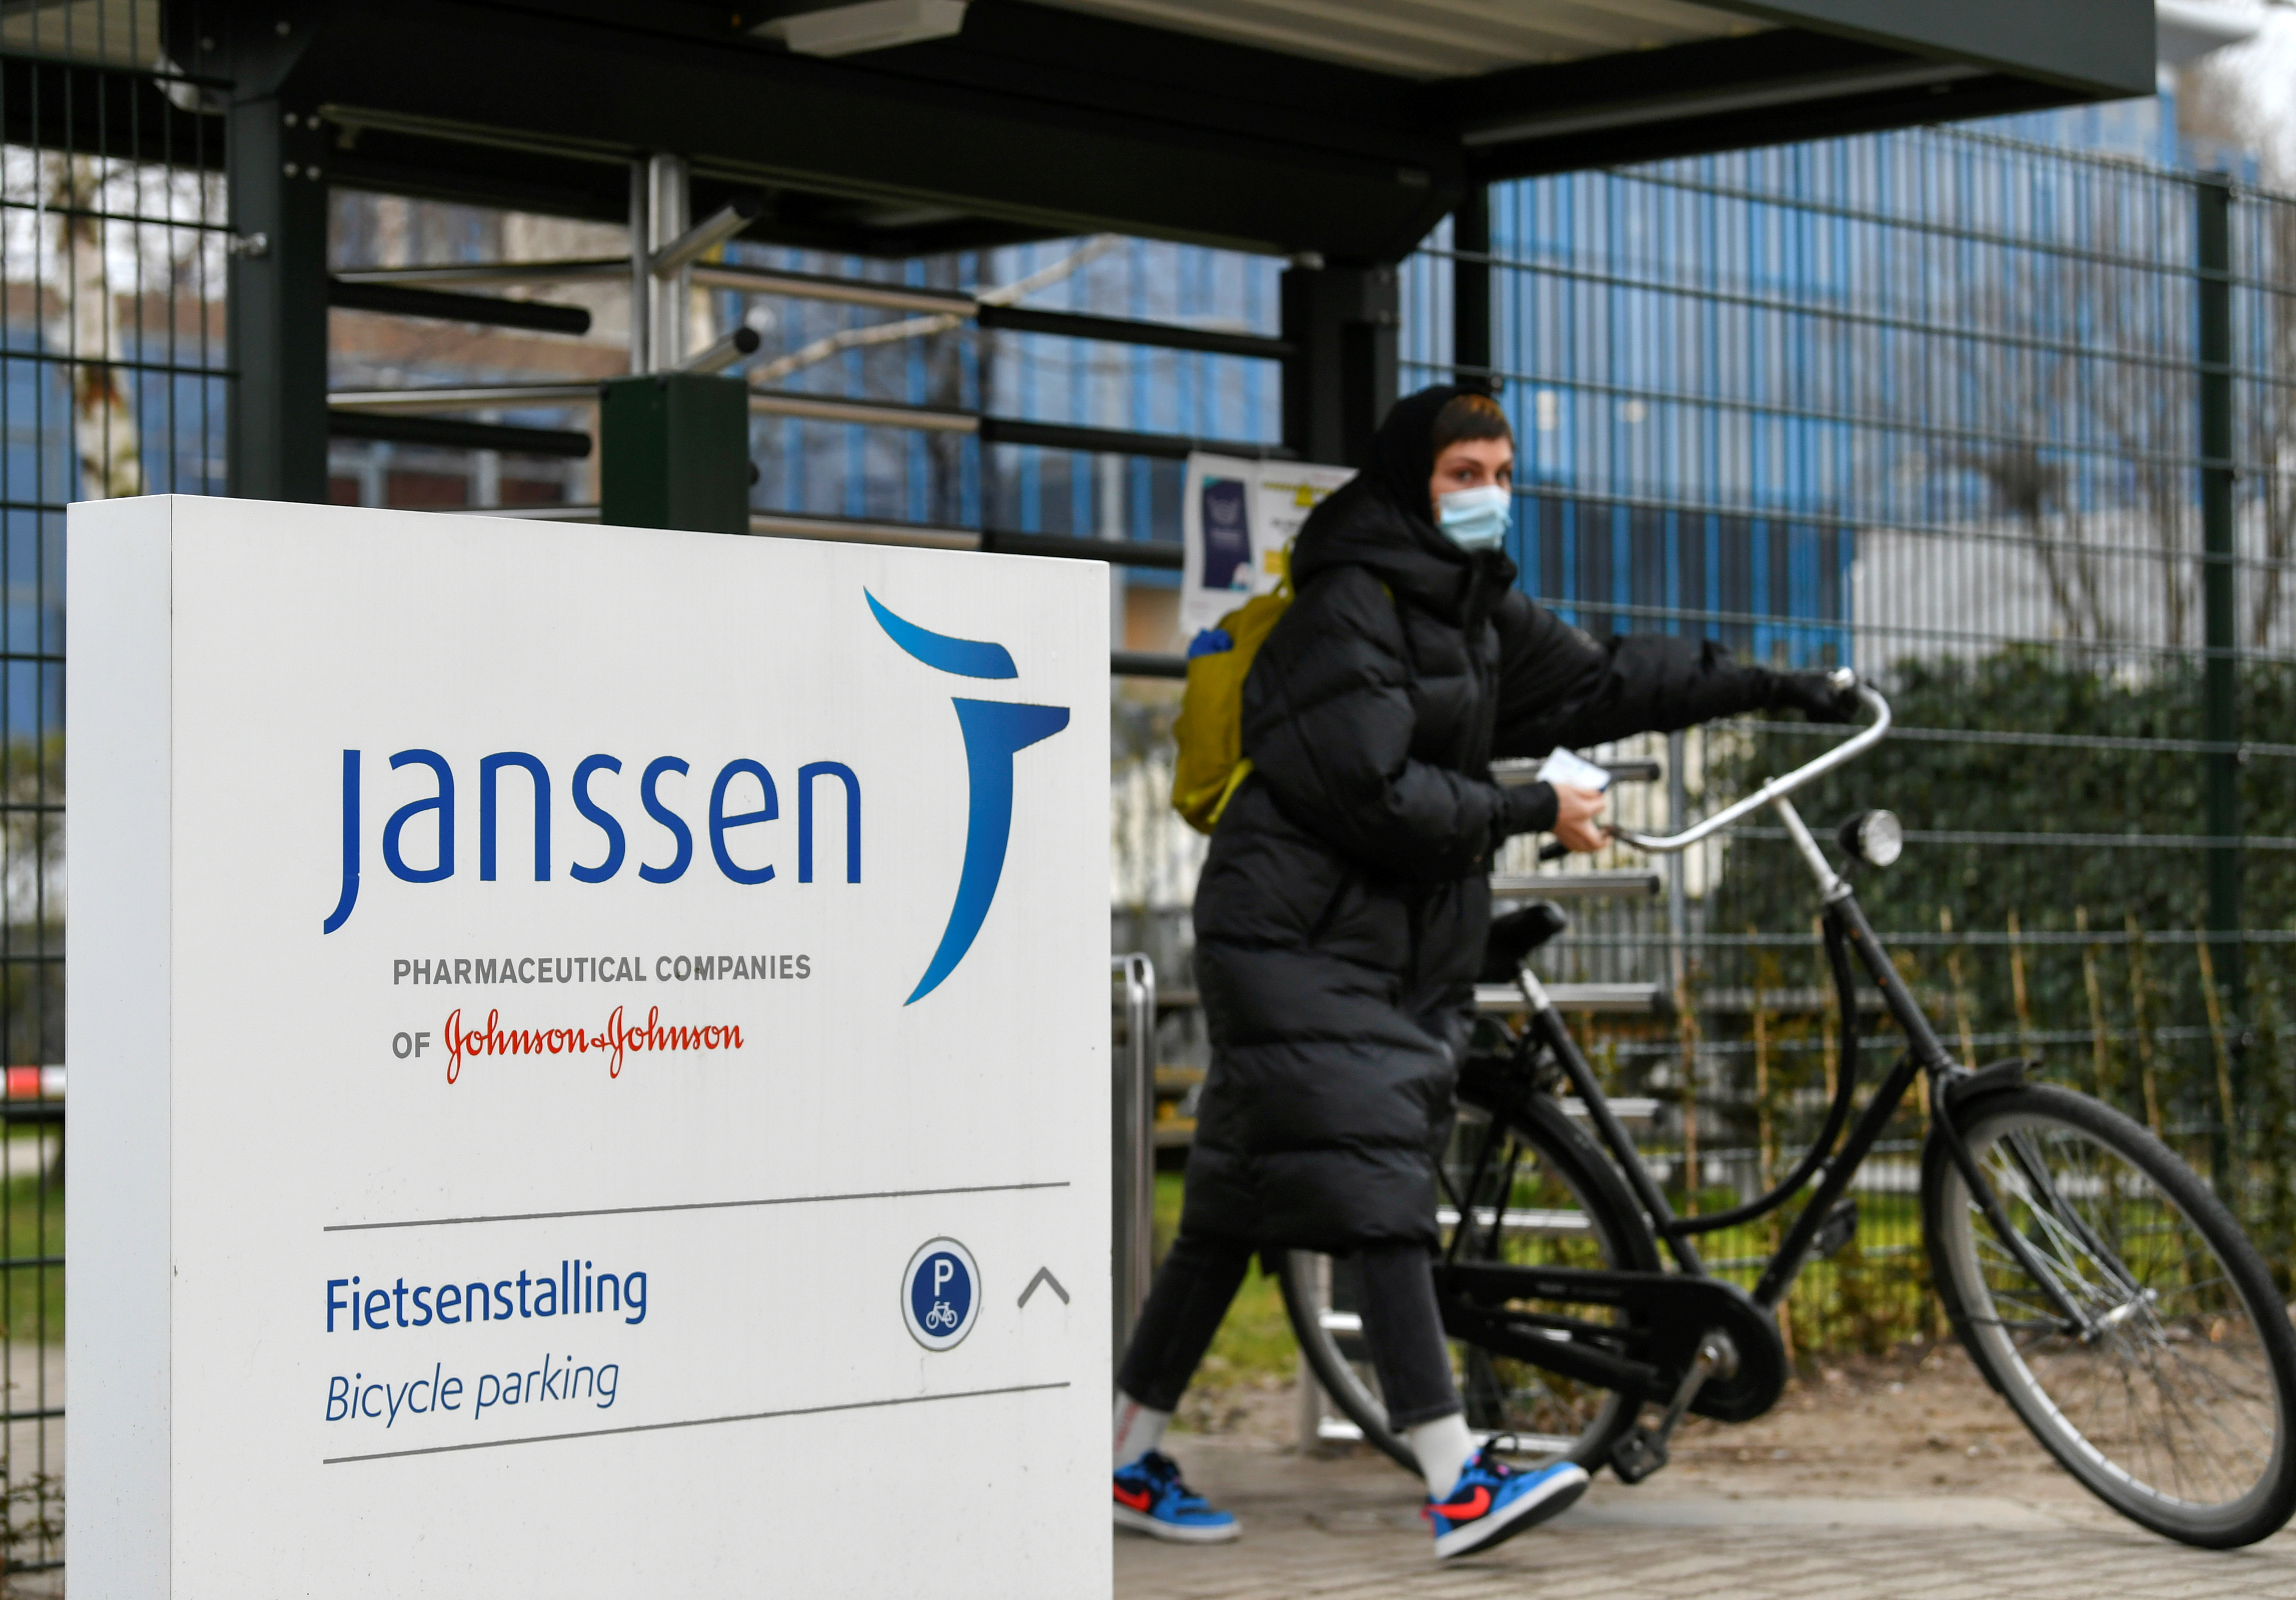 A woman leaves with her bike at Johnson and Johnson's subsidiary Janssen Vaccines in Leiden